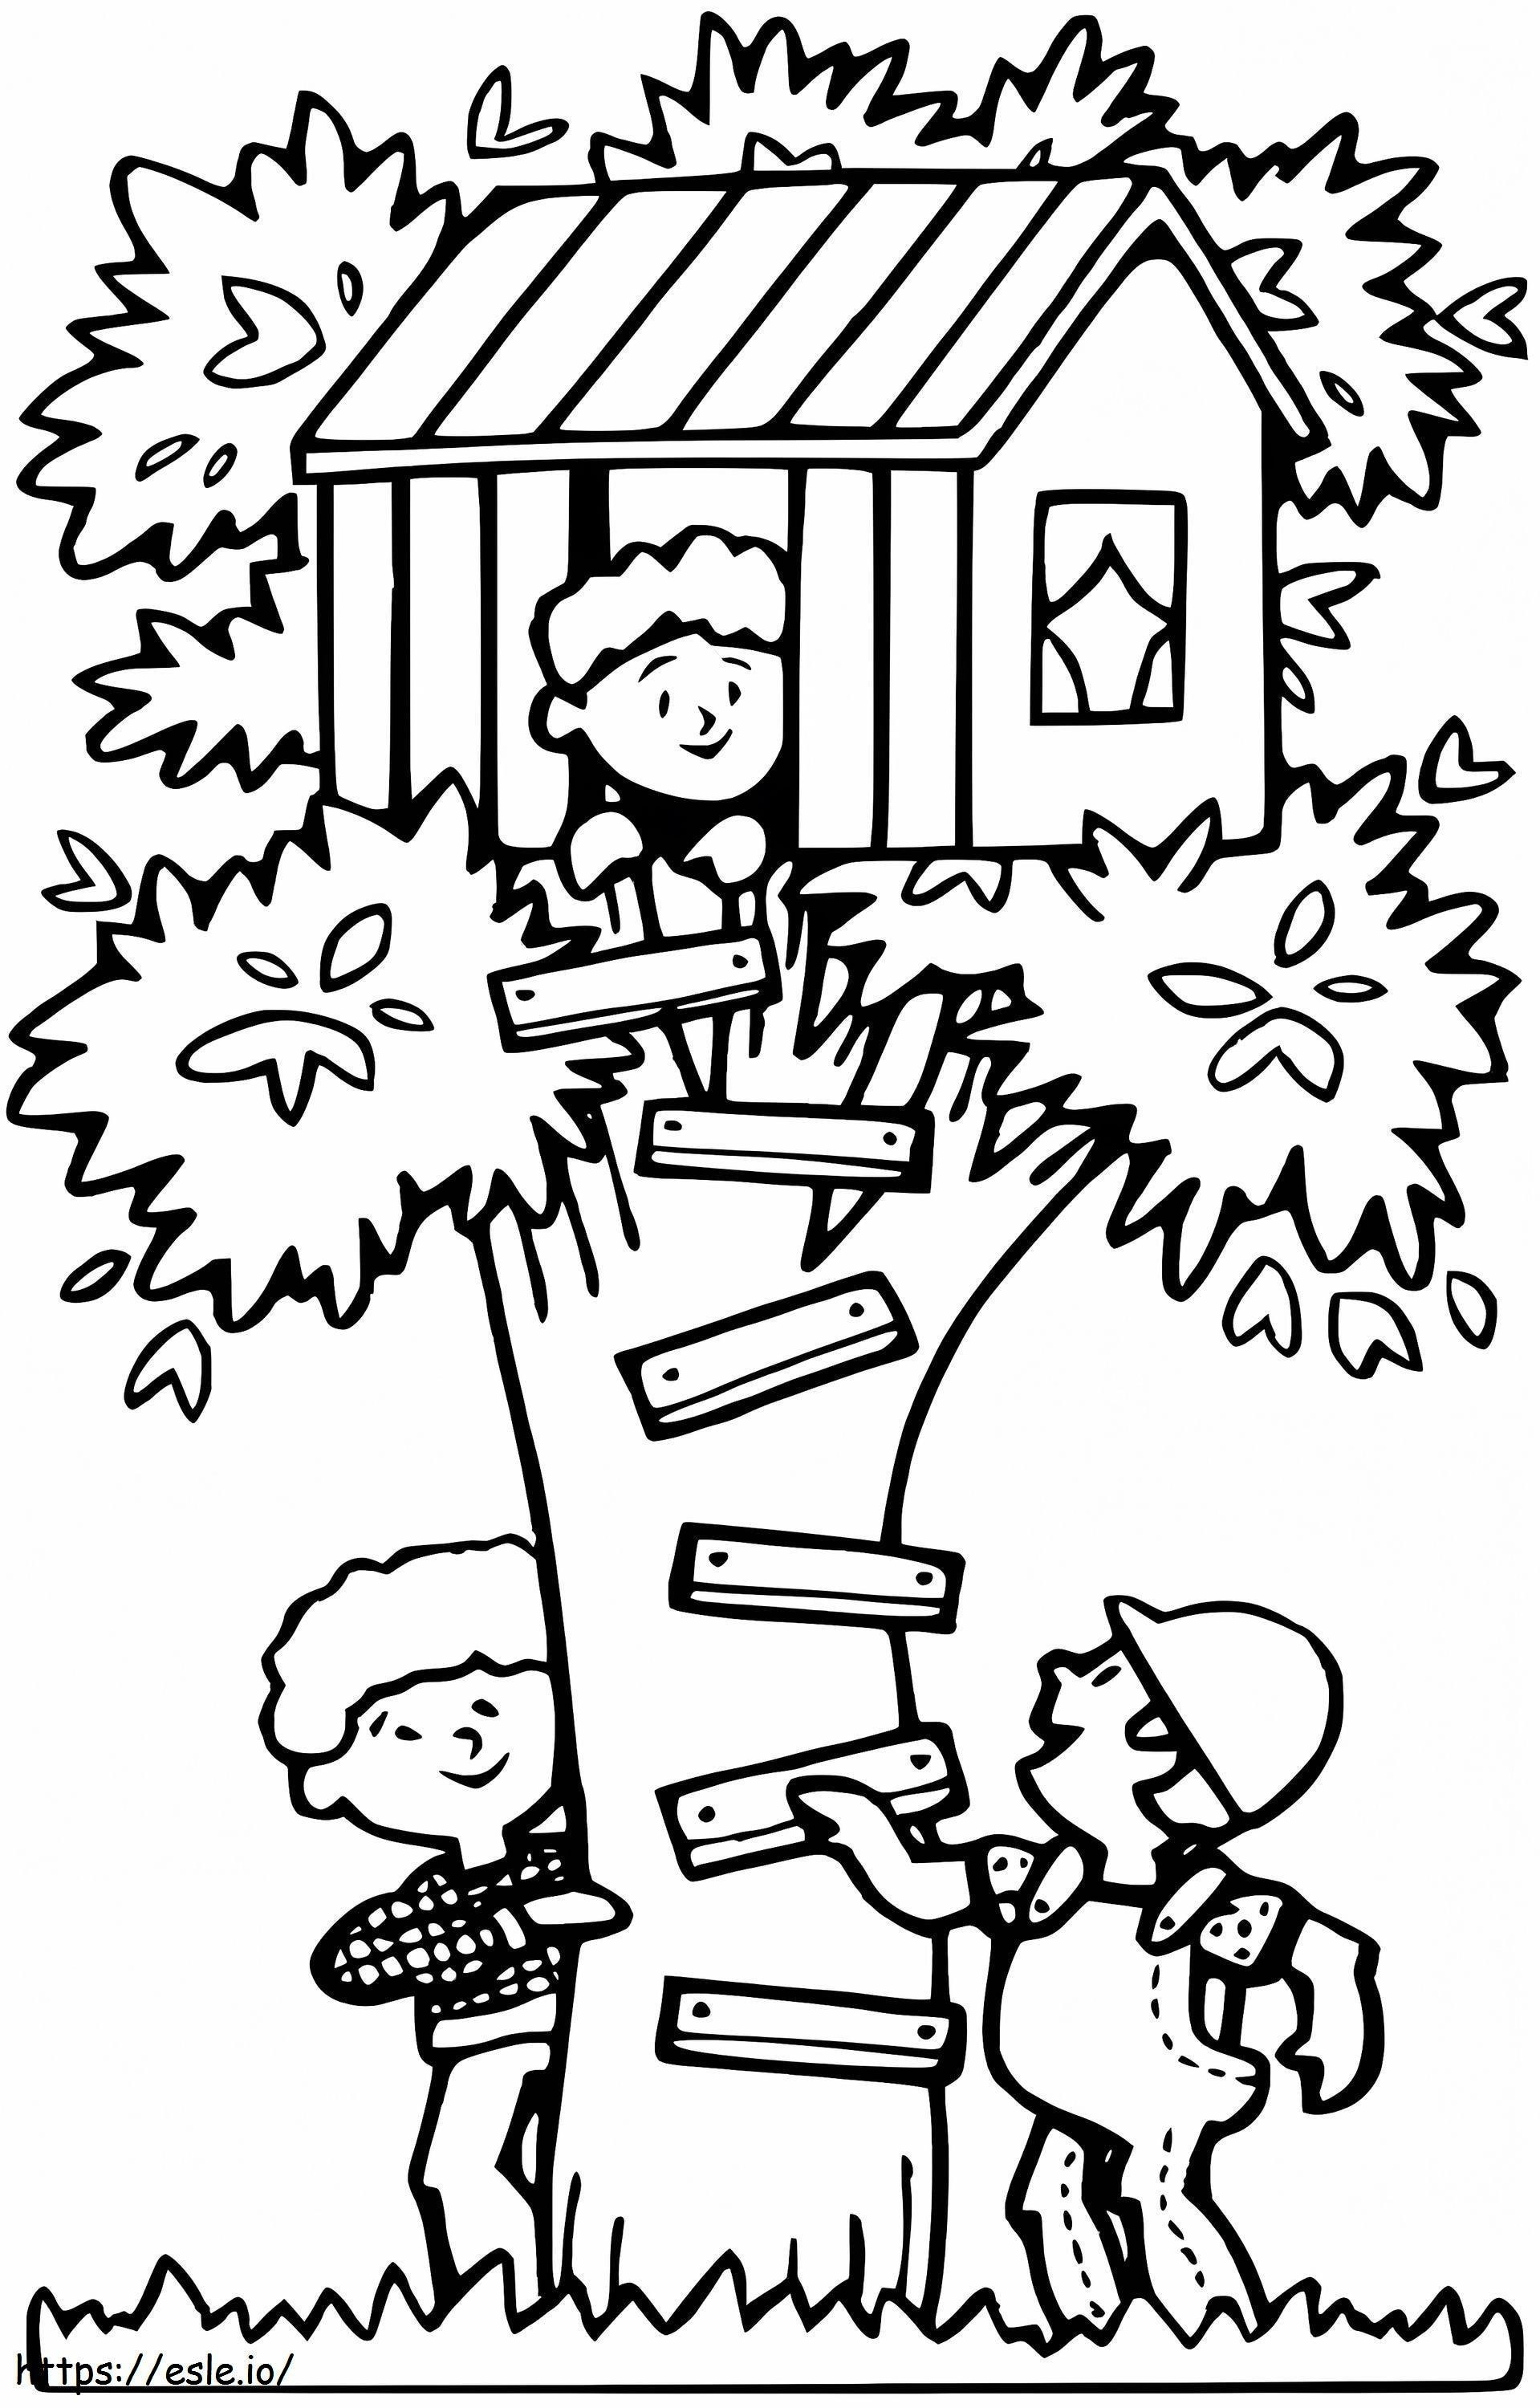 Kids And Treehouse coloring page